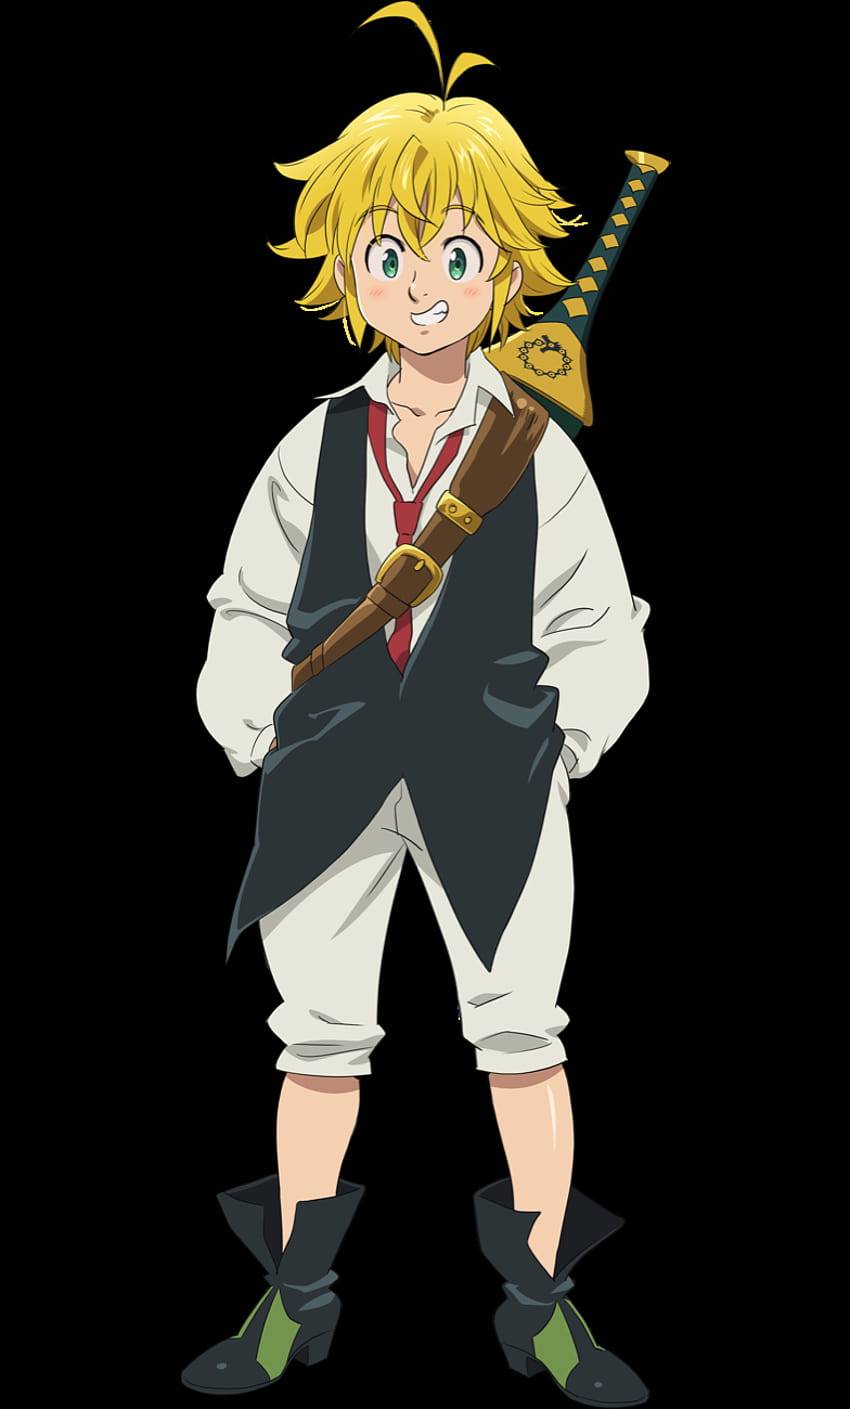 Wallpaper ID 303123  Anime The Seven Deadly Sins Phone Wallpaper Ban  The Seven Deadly Sins Meliodas The Seven Deadly Sins 1440x3200 free  download